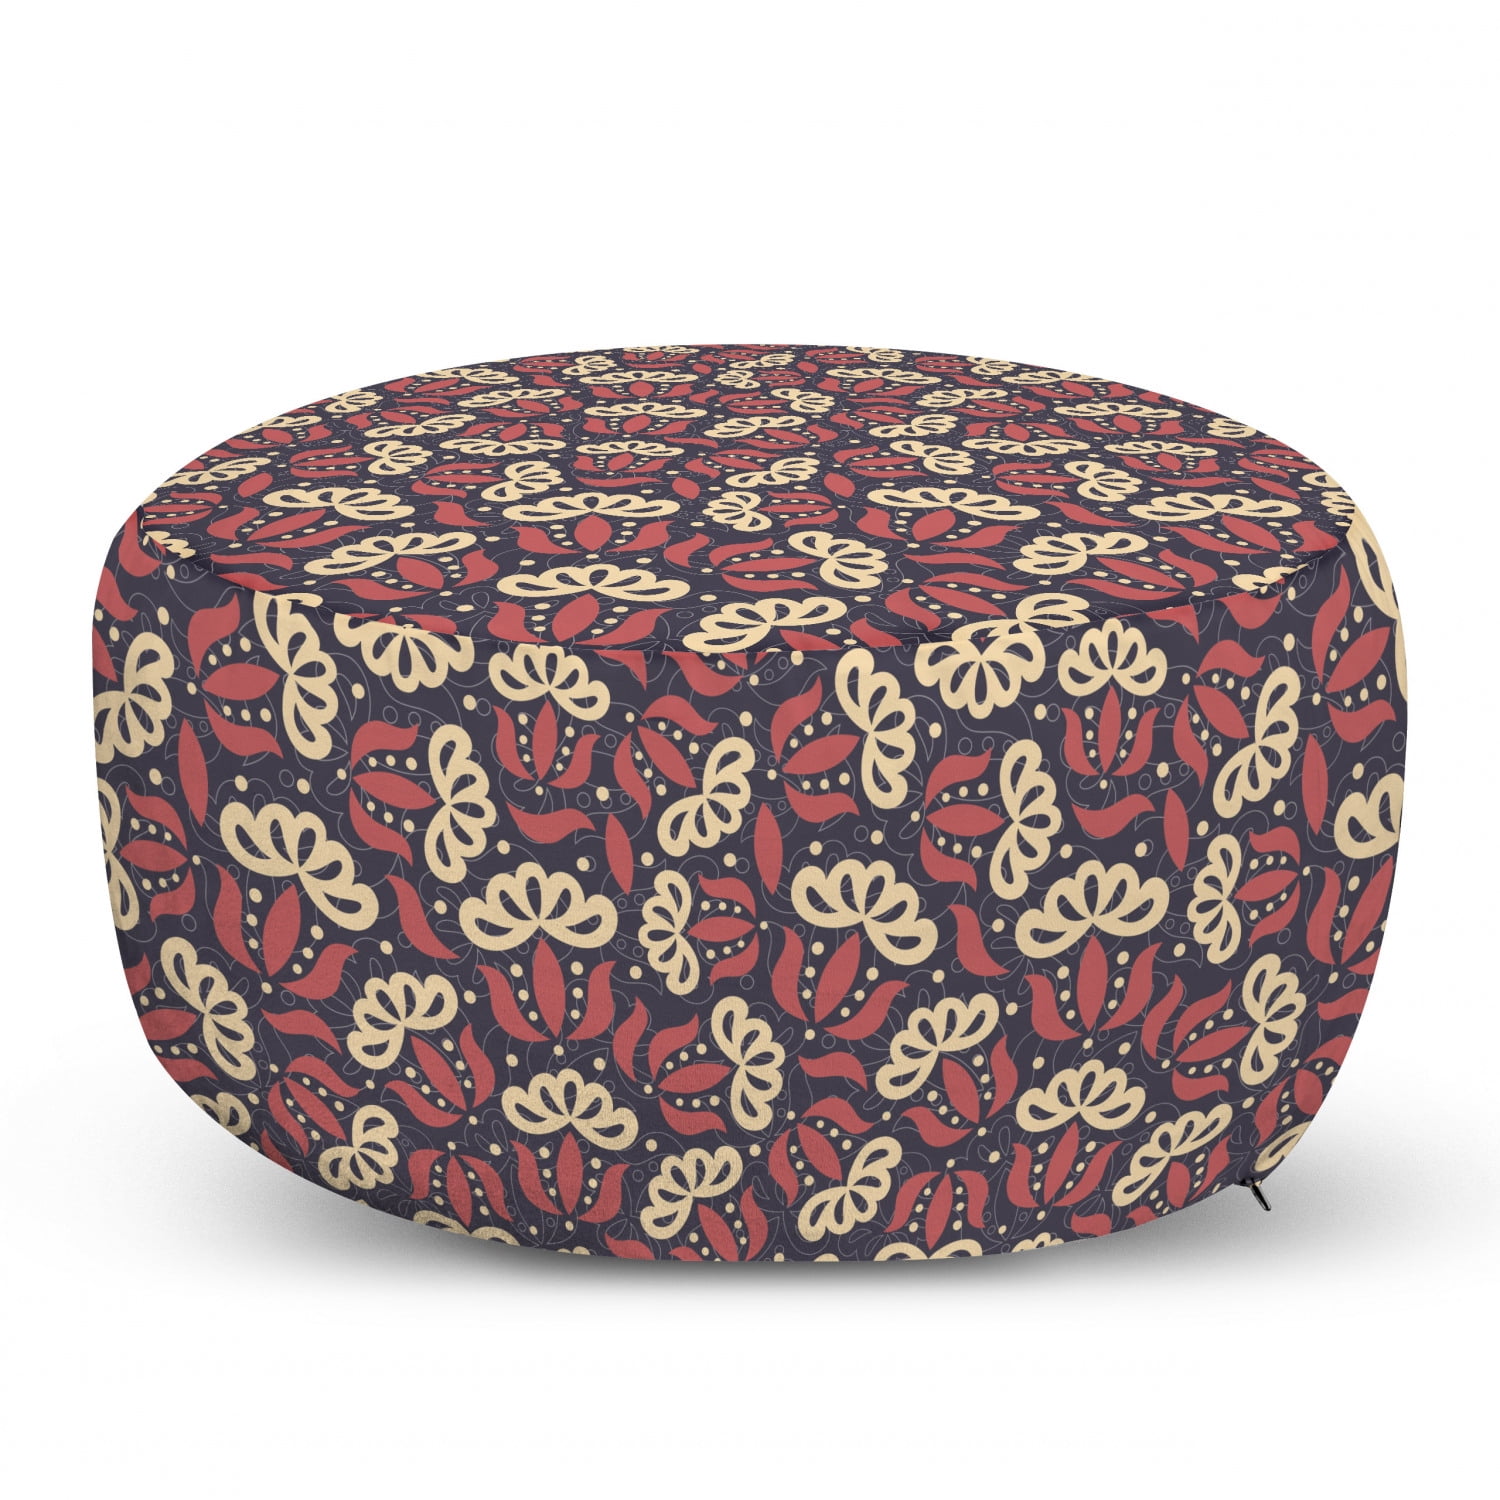 Sea Blue and Dark Turquoise Decorative Soft Foot Rest with Removable Cover Living Room and Bedroom Repeating Formations of Botanical Plants on a Plain Background Ambesonne Floral Ottoman Pouf